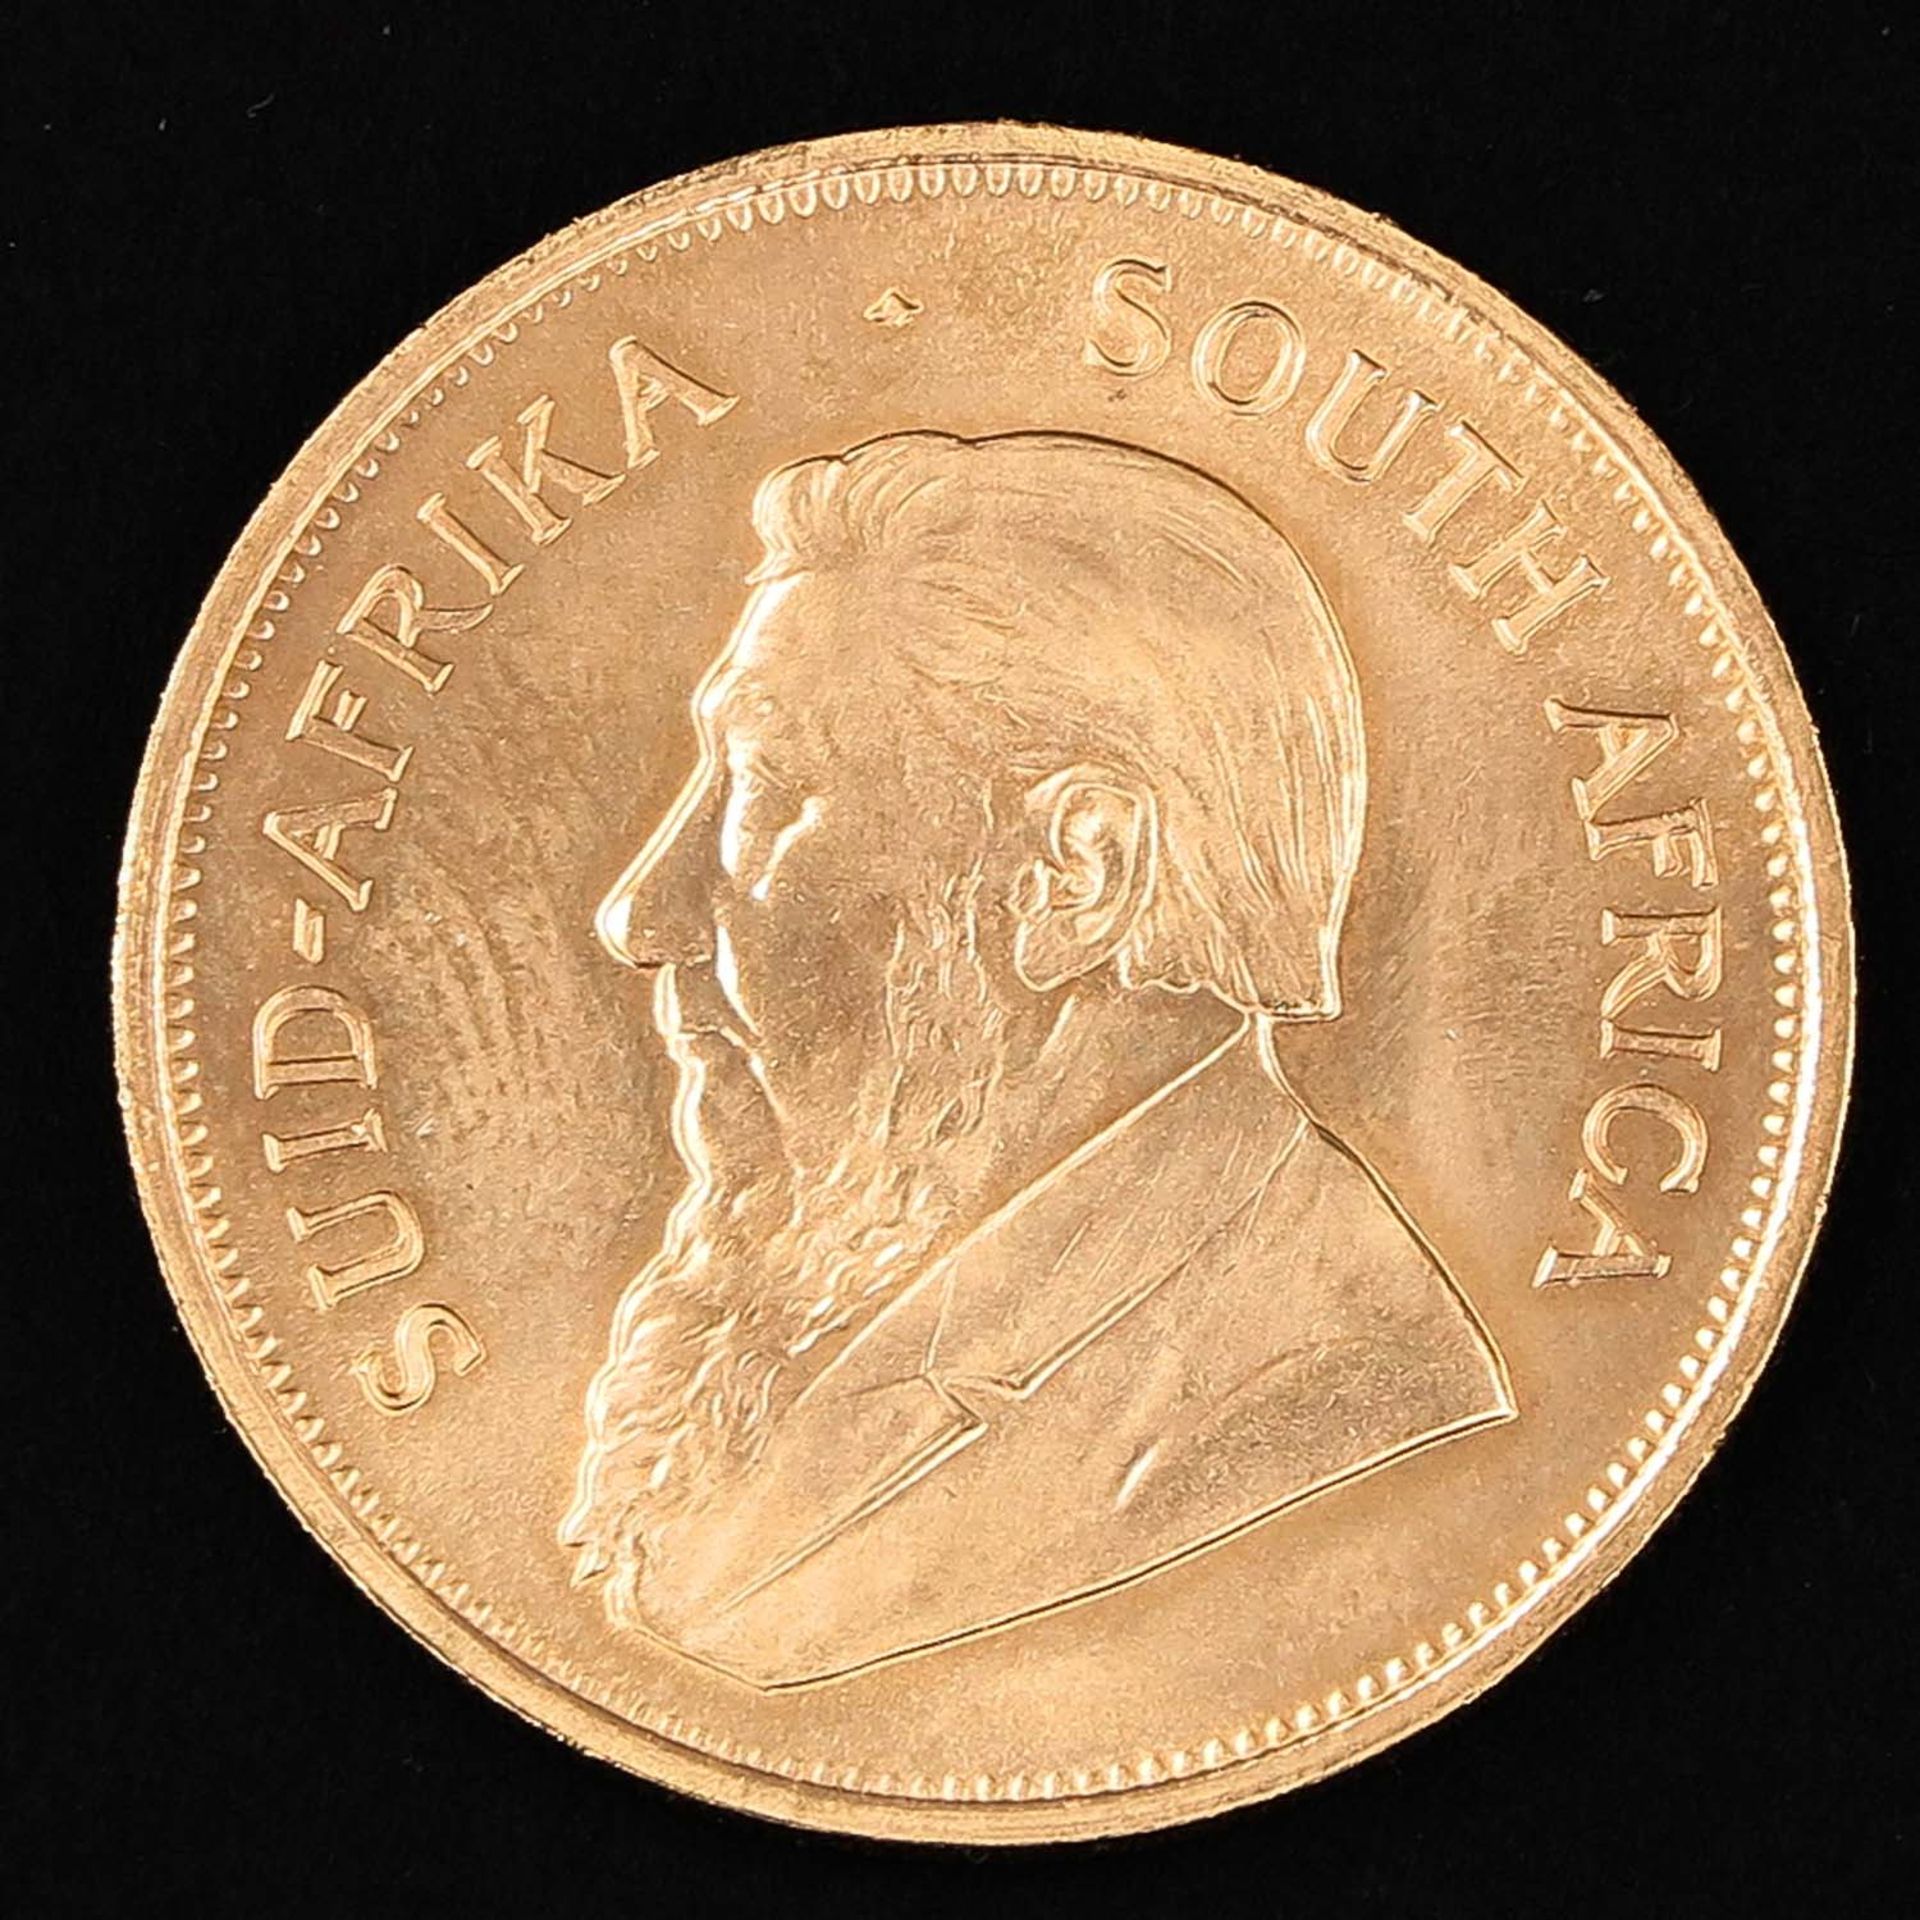 A Krugerrand Coin 1977 - Image 2 of 2